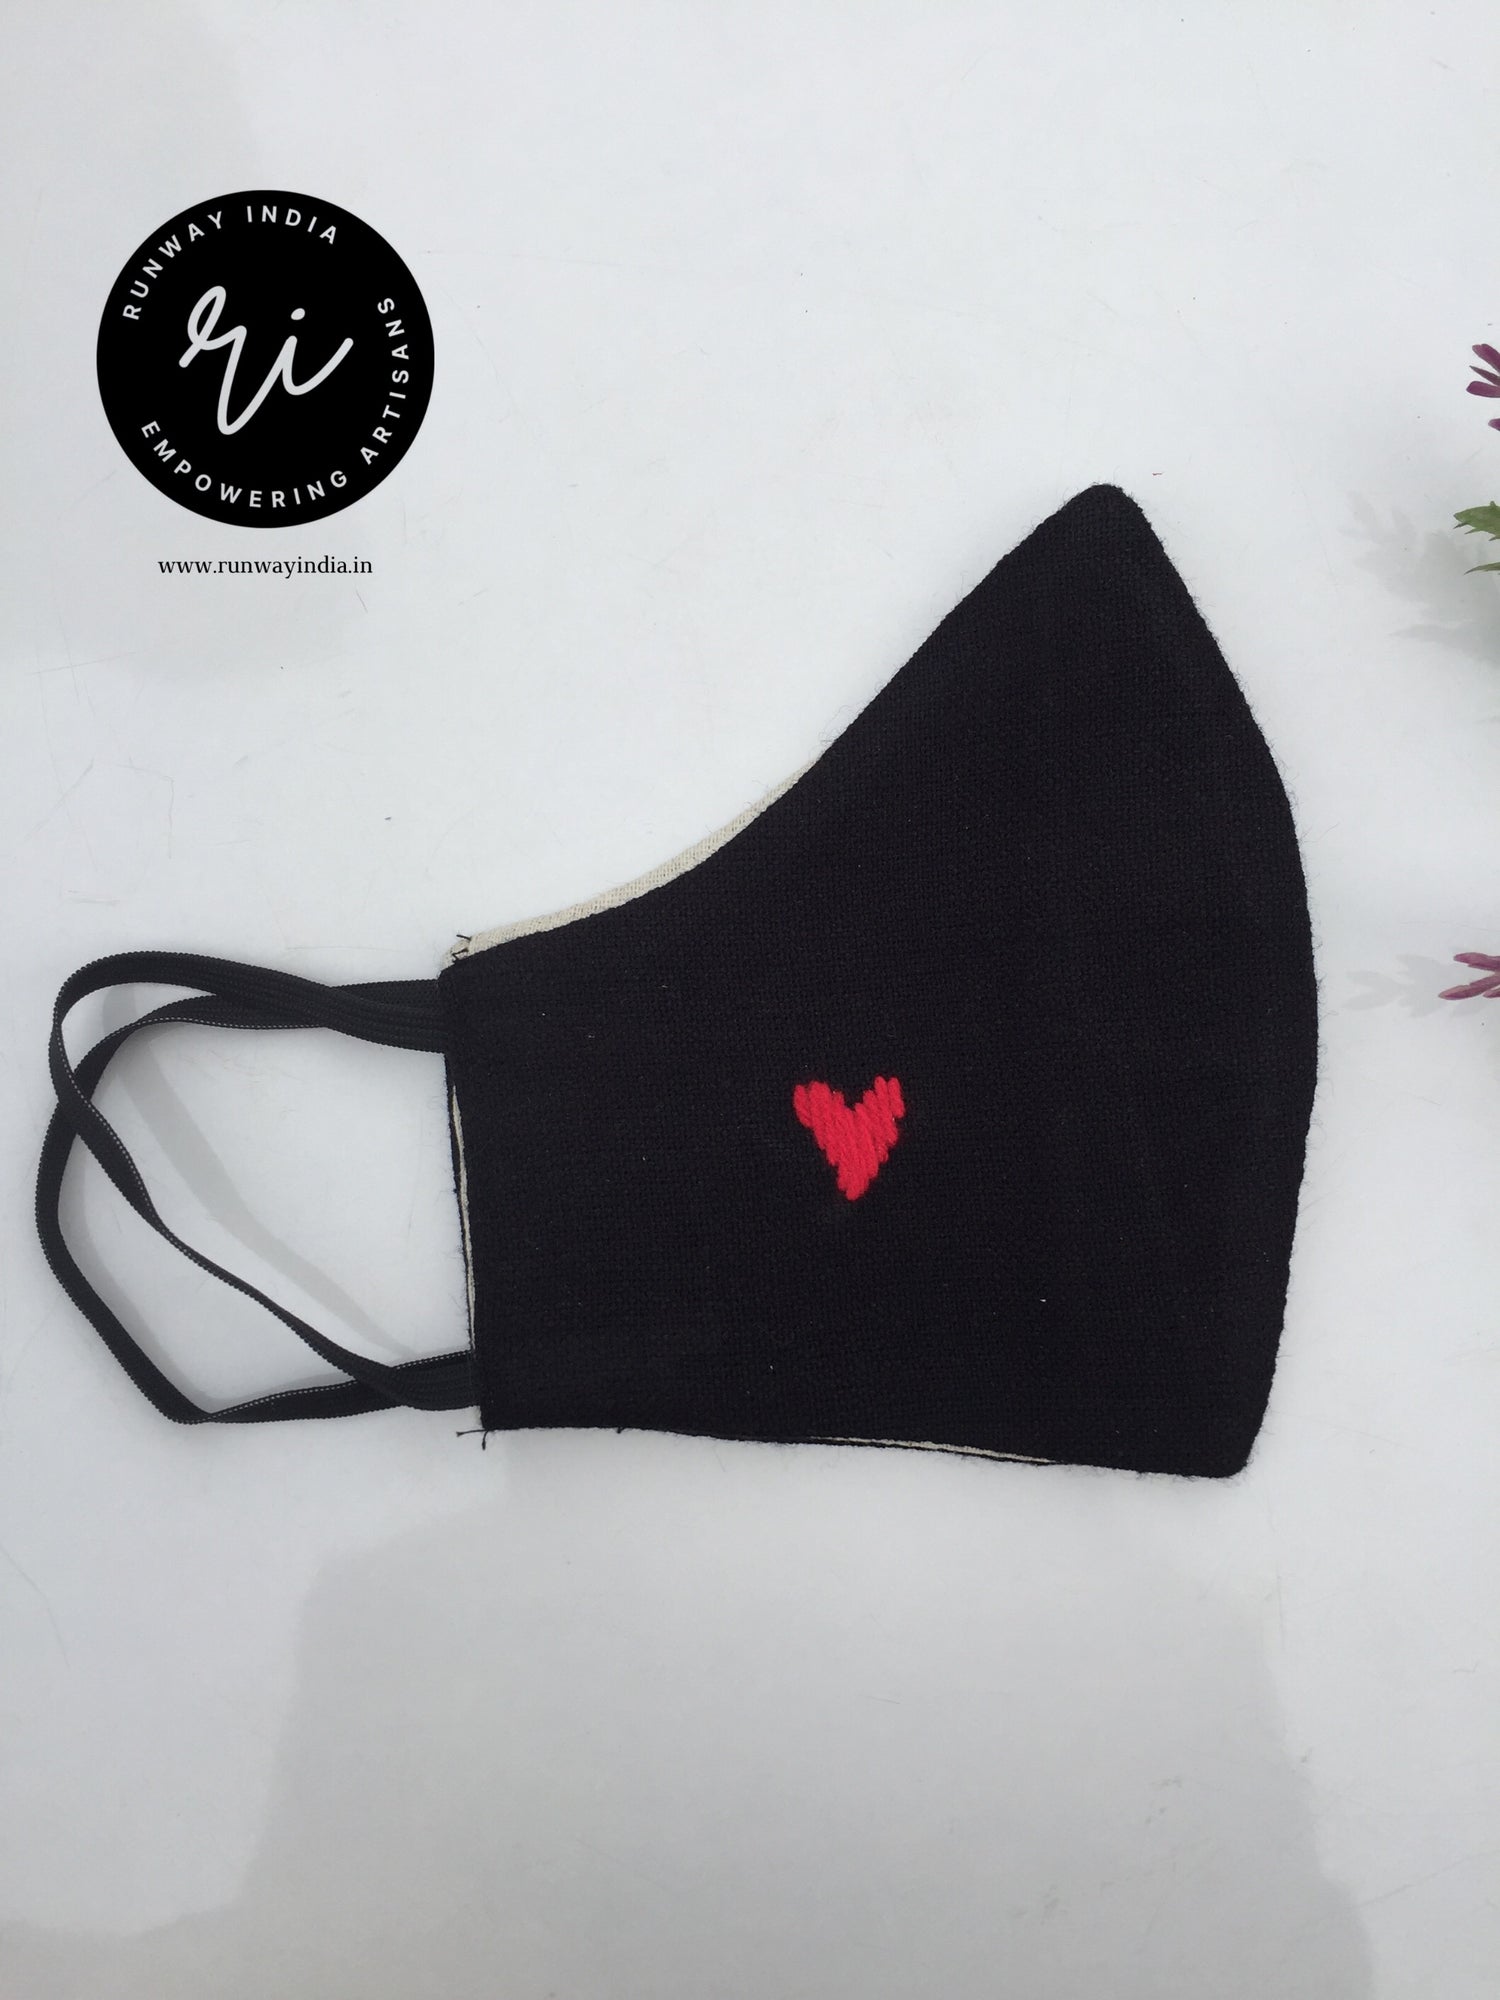 HANDLOOM FACE MASK - VALENTINE'S DAY EDITION